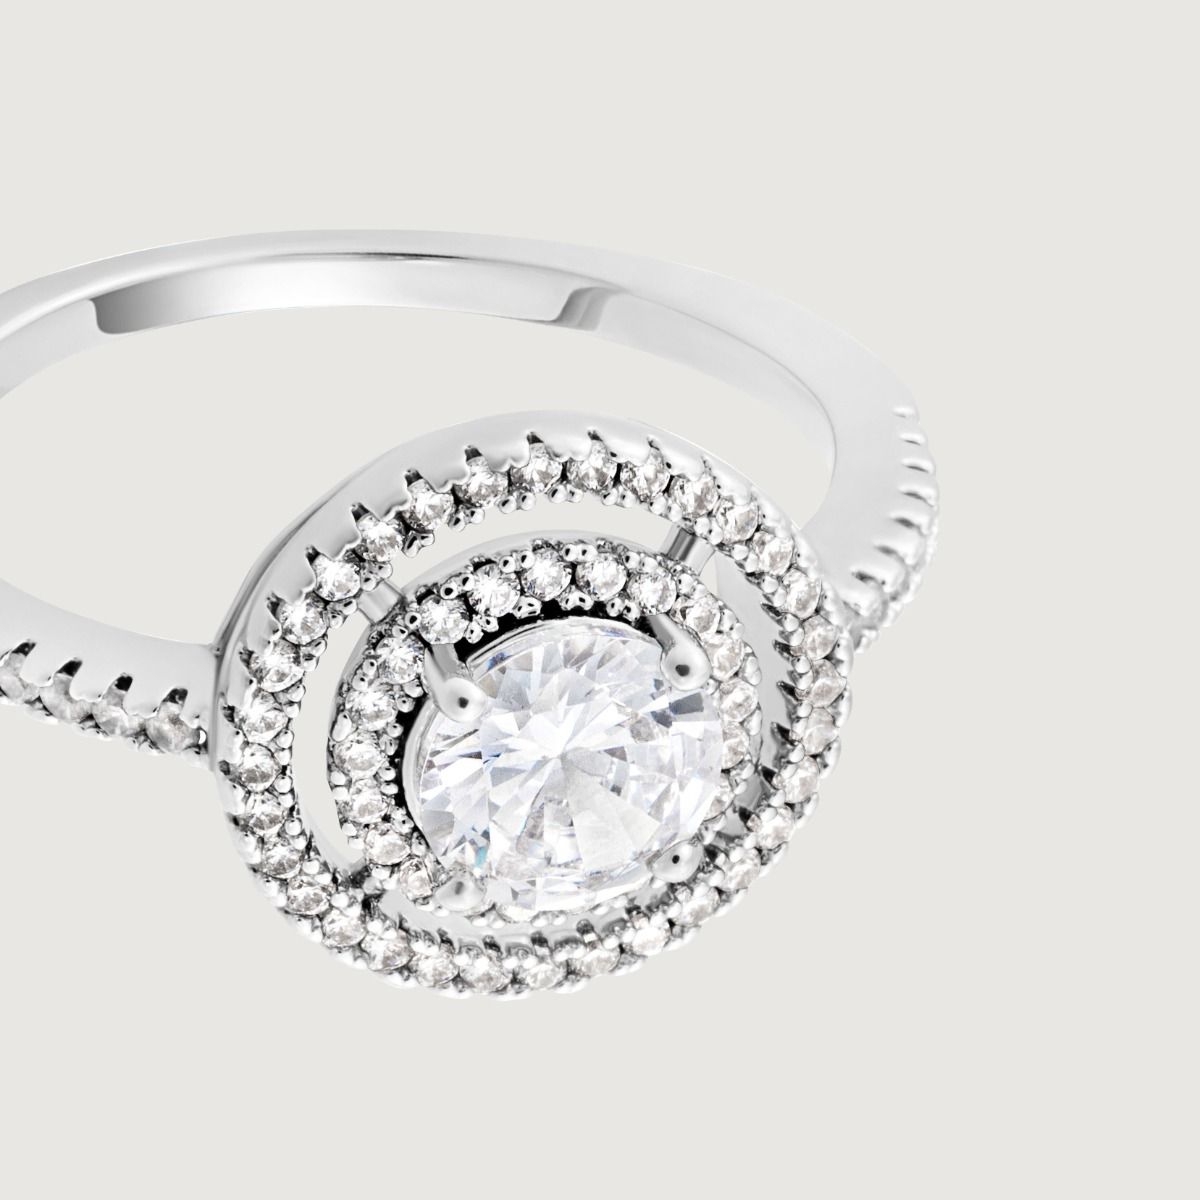 Make a statement with this stunning brilliant cut double halo ring. The centre brilliant cut cubic zirconia is delicately surrounded with smaller sparkling cubic zirconia stones creating a dramatic, cut out effect.